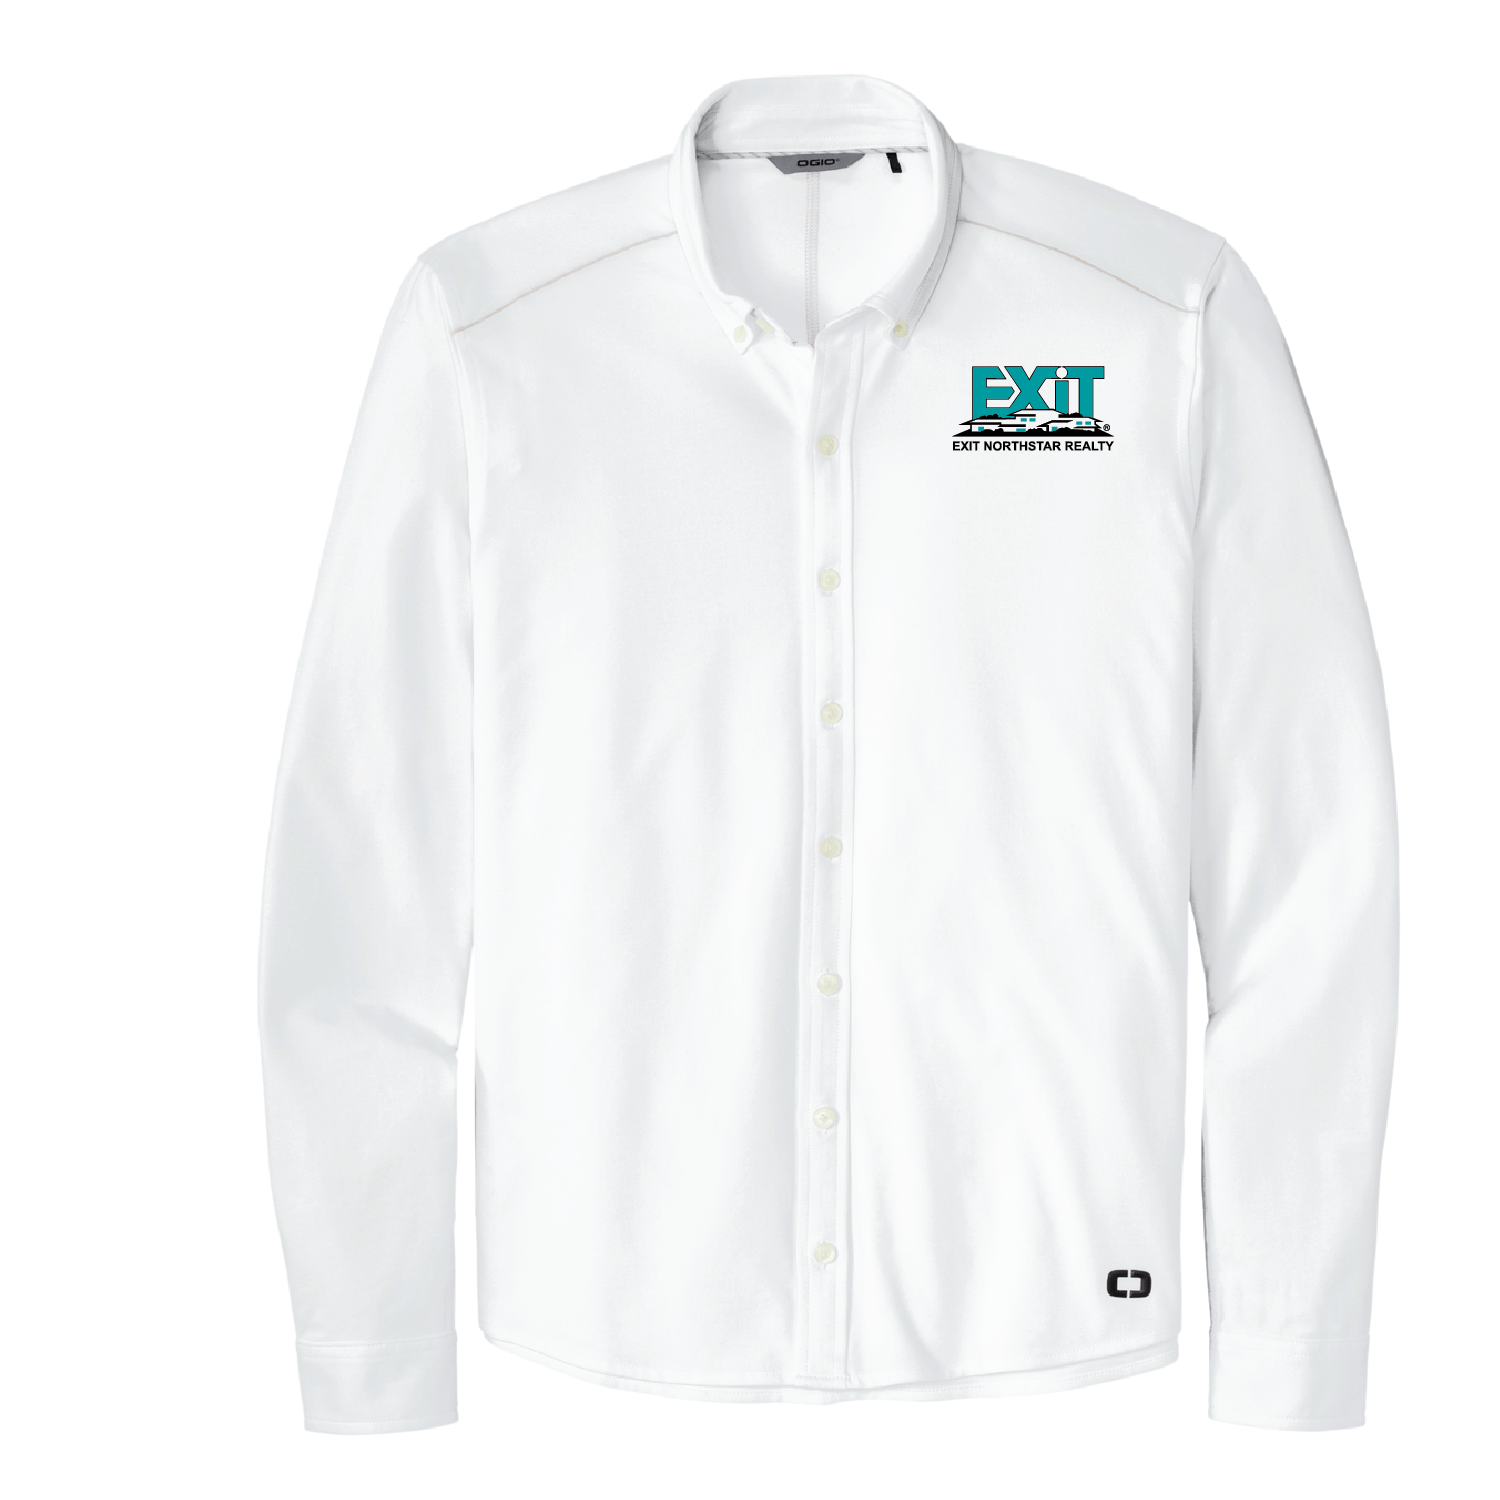 Exit Northstar Realty OGIO Long Sleeve Button-Up - DSP On Demand